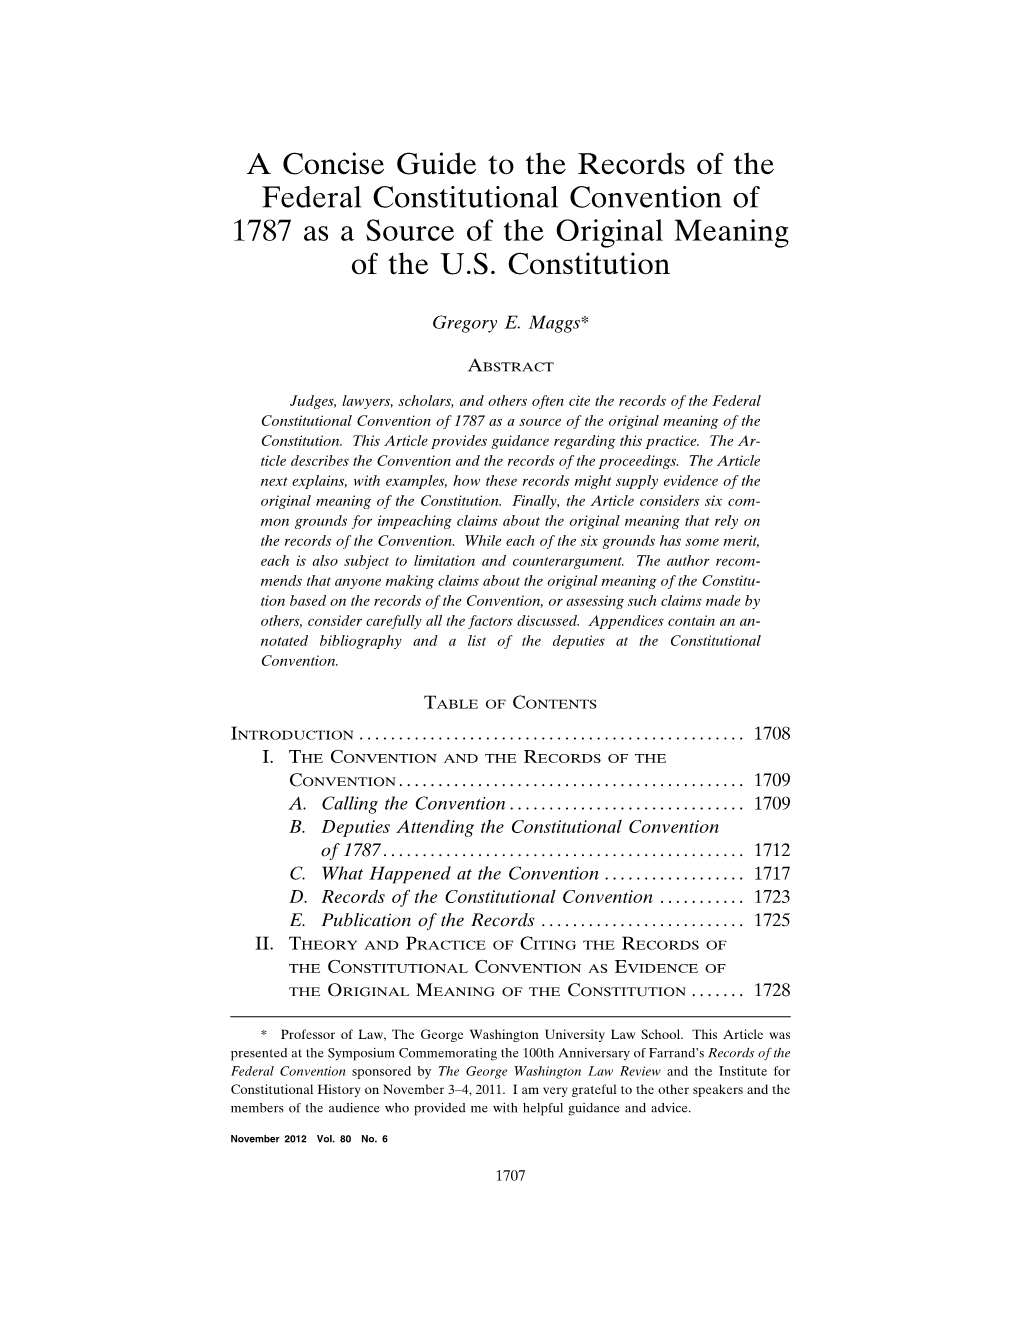 A Concise Guide to the Records of the Federal Constitutional Convention of 1787 As a Source of the Original Meaning of the U.S